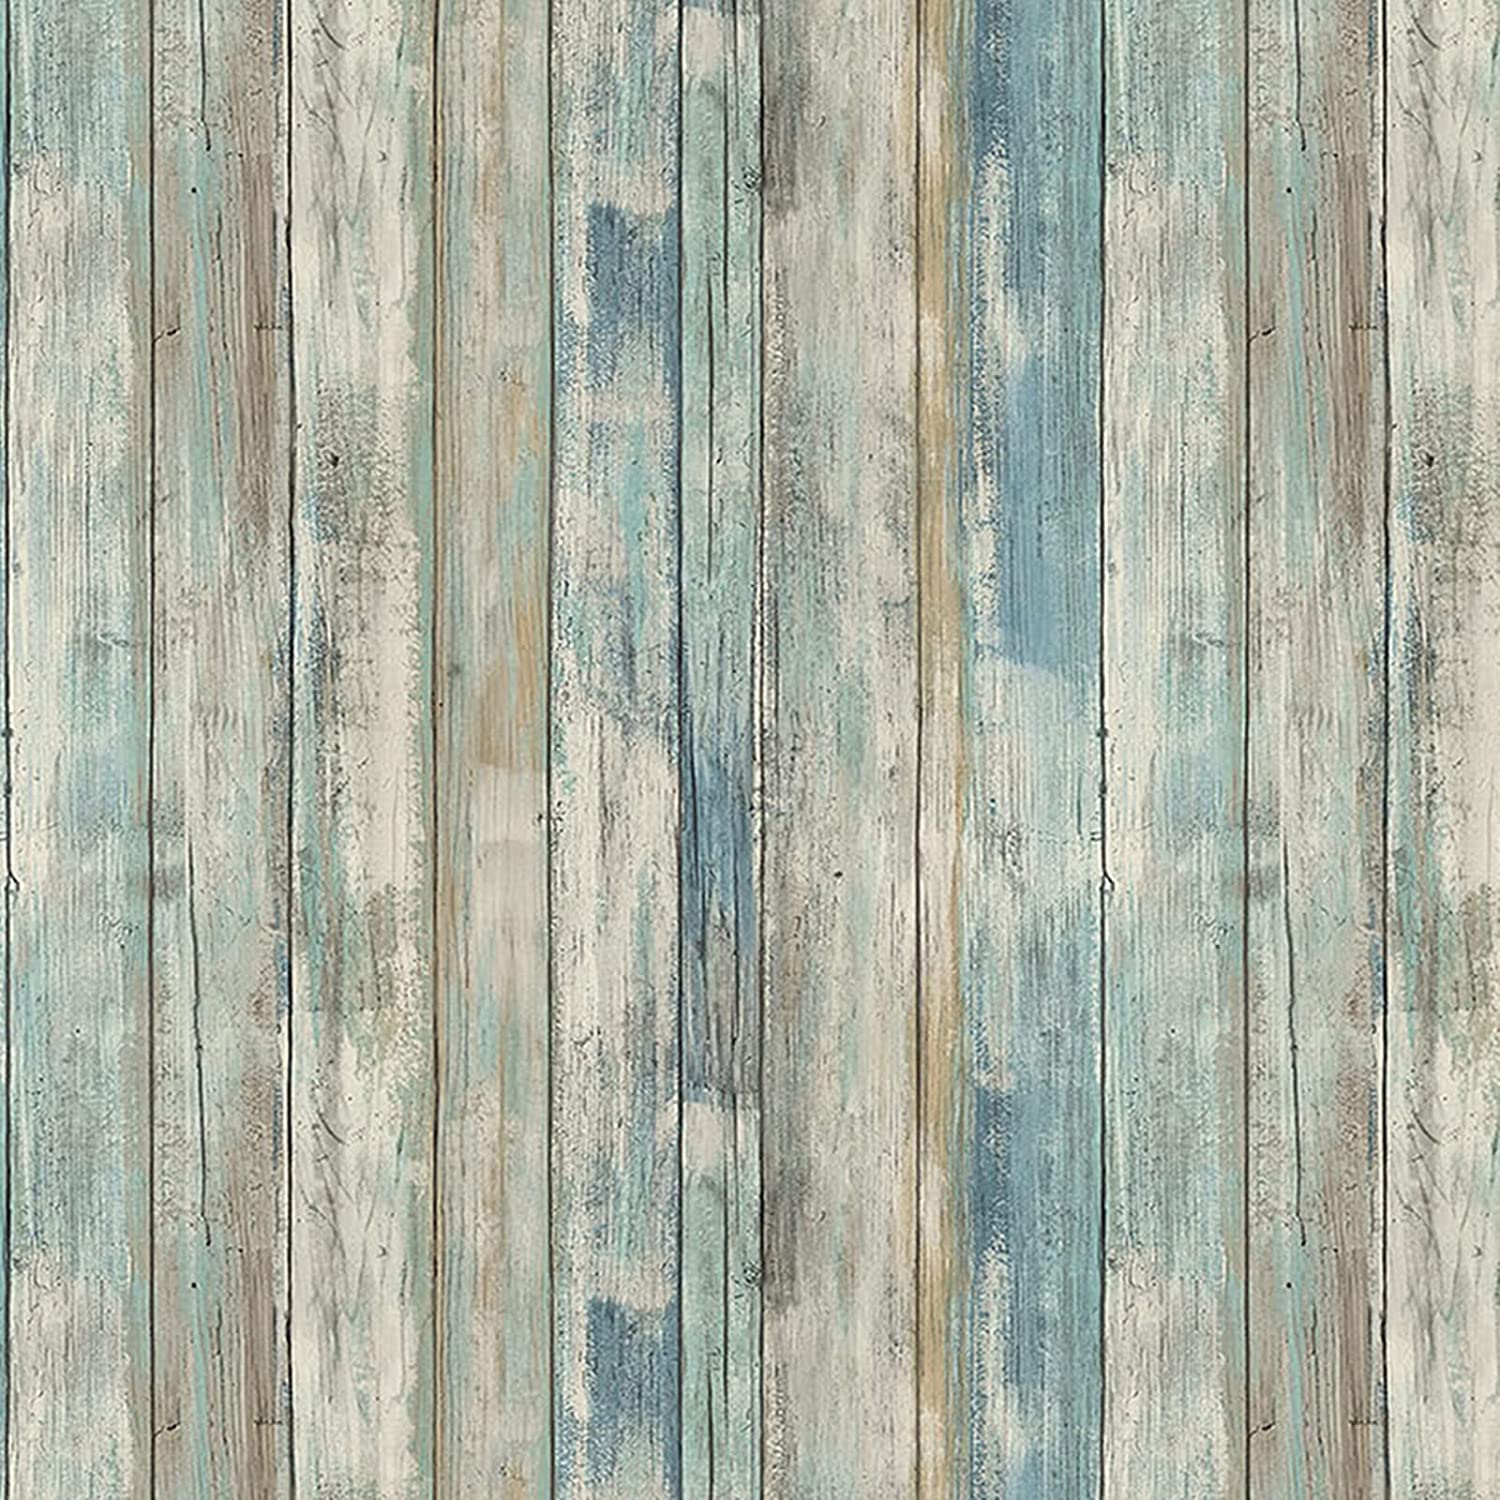 Wood Wallpaper Rustic Self Adhesive Removable Faux Wood Peel And Stick Wallpaper Distressed Wood Plank Grain Shiplap Wall Paper Vintage Wood Panel 11.8''x78.7''/Roll